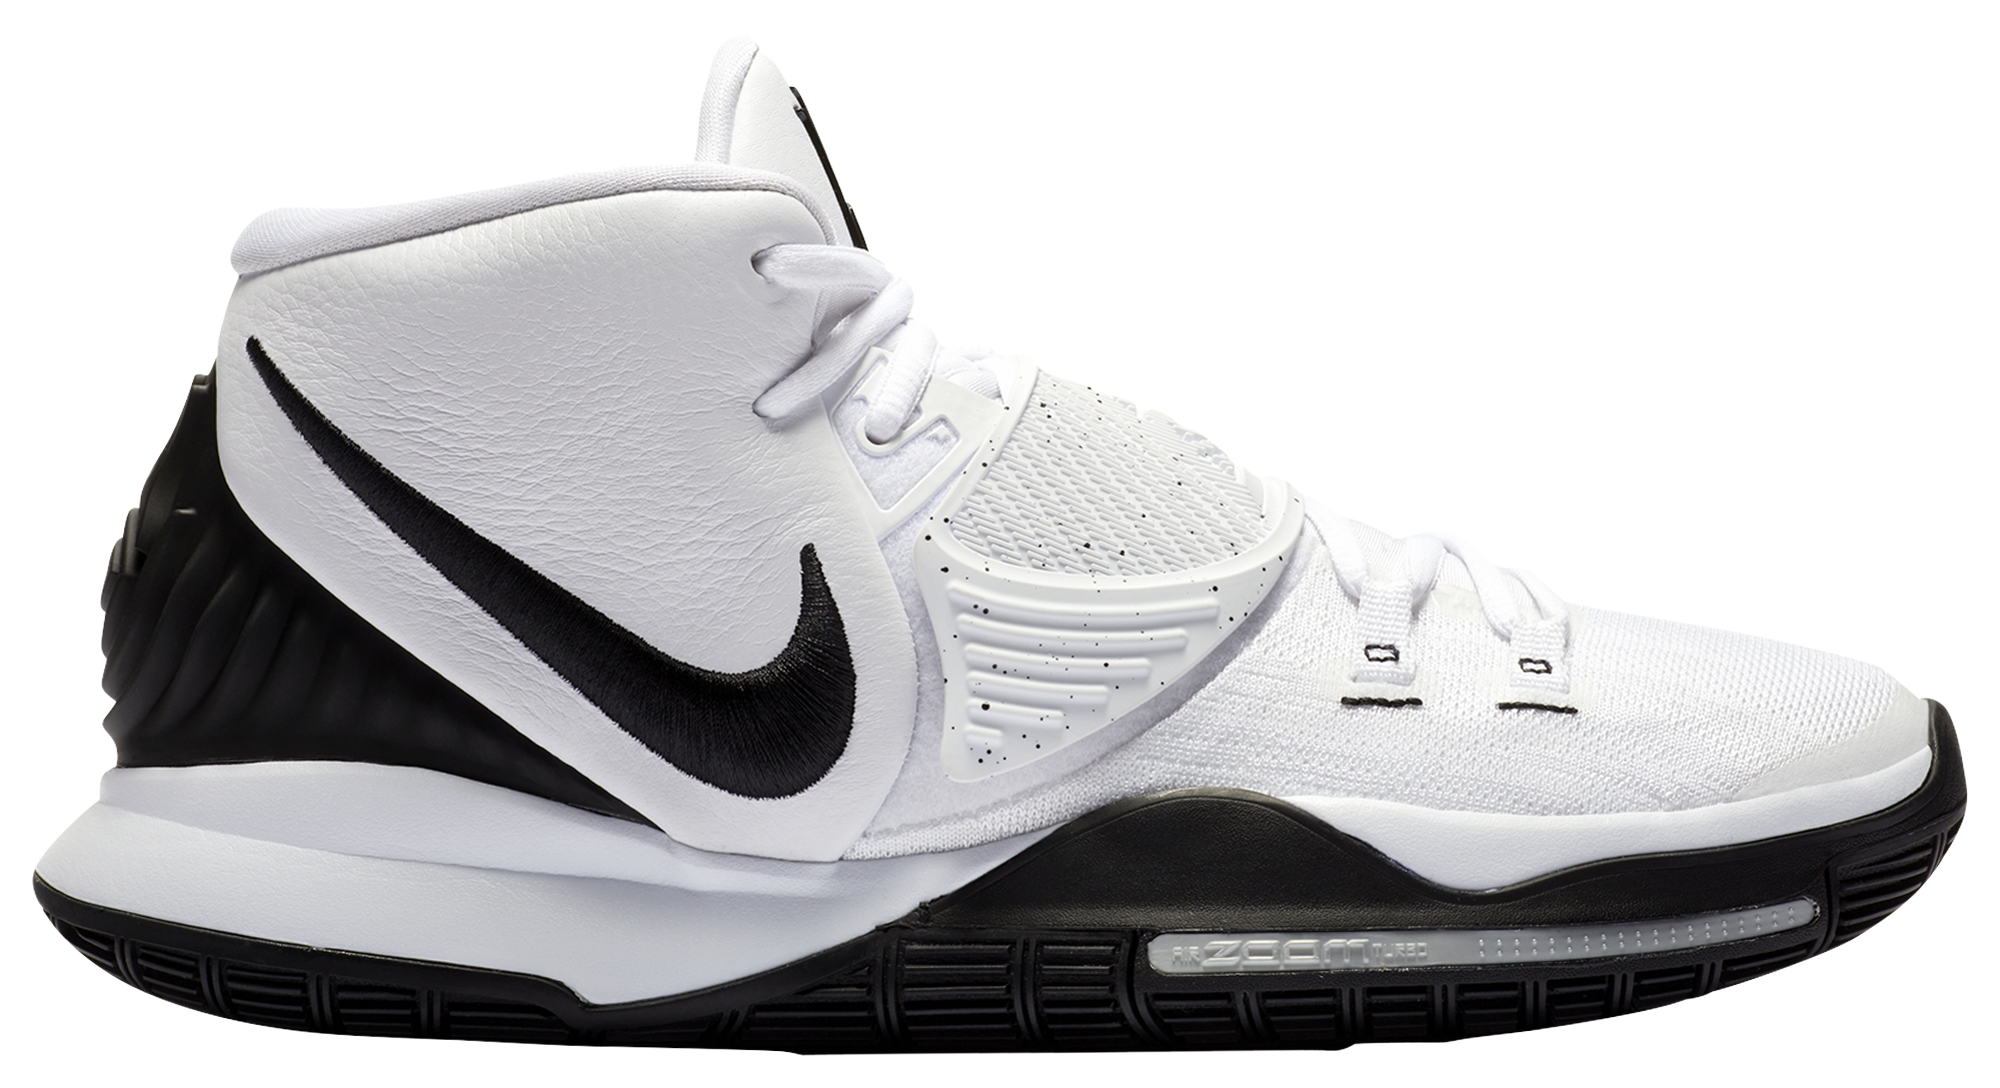 kyrie irving basketball shoes foot locker